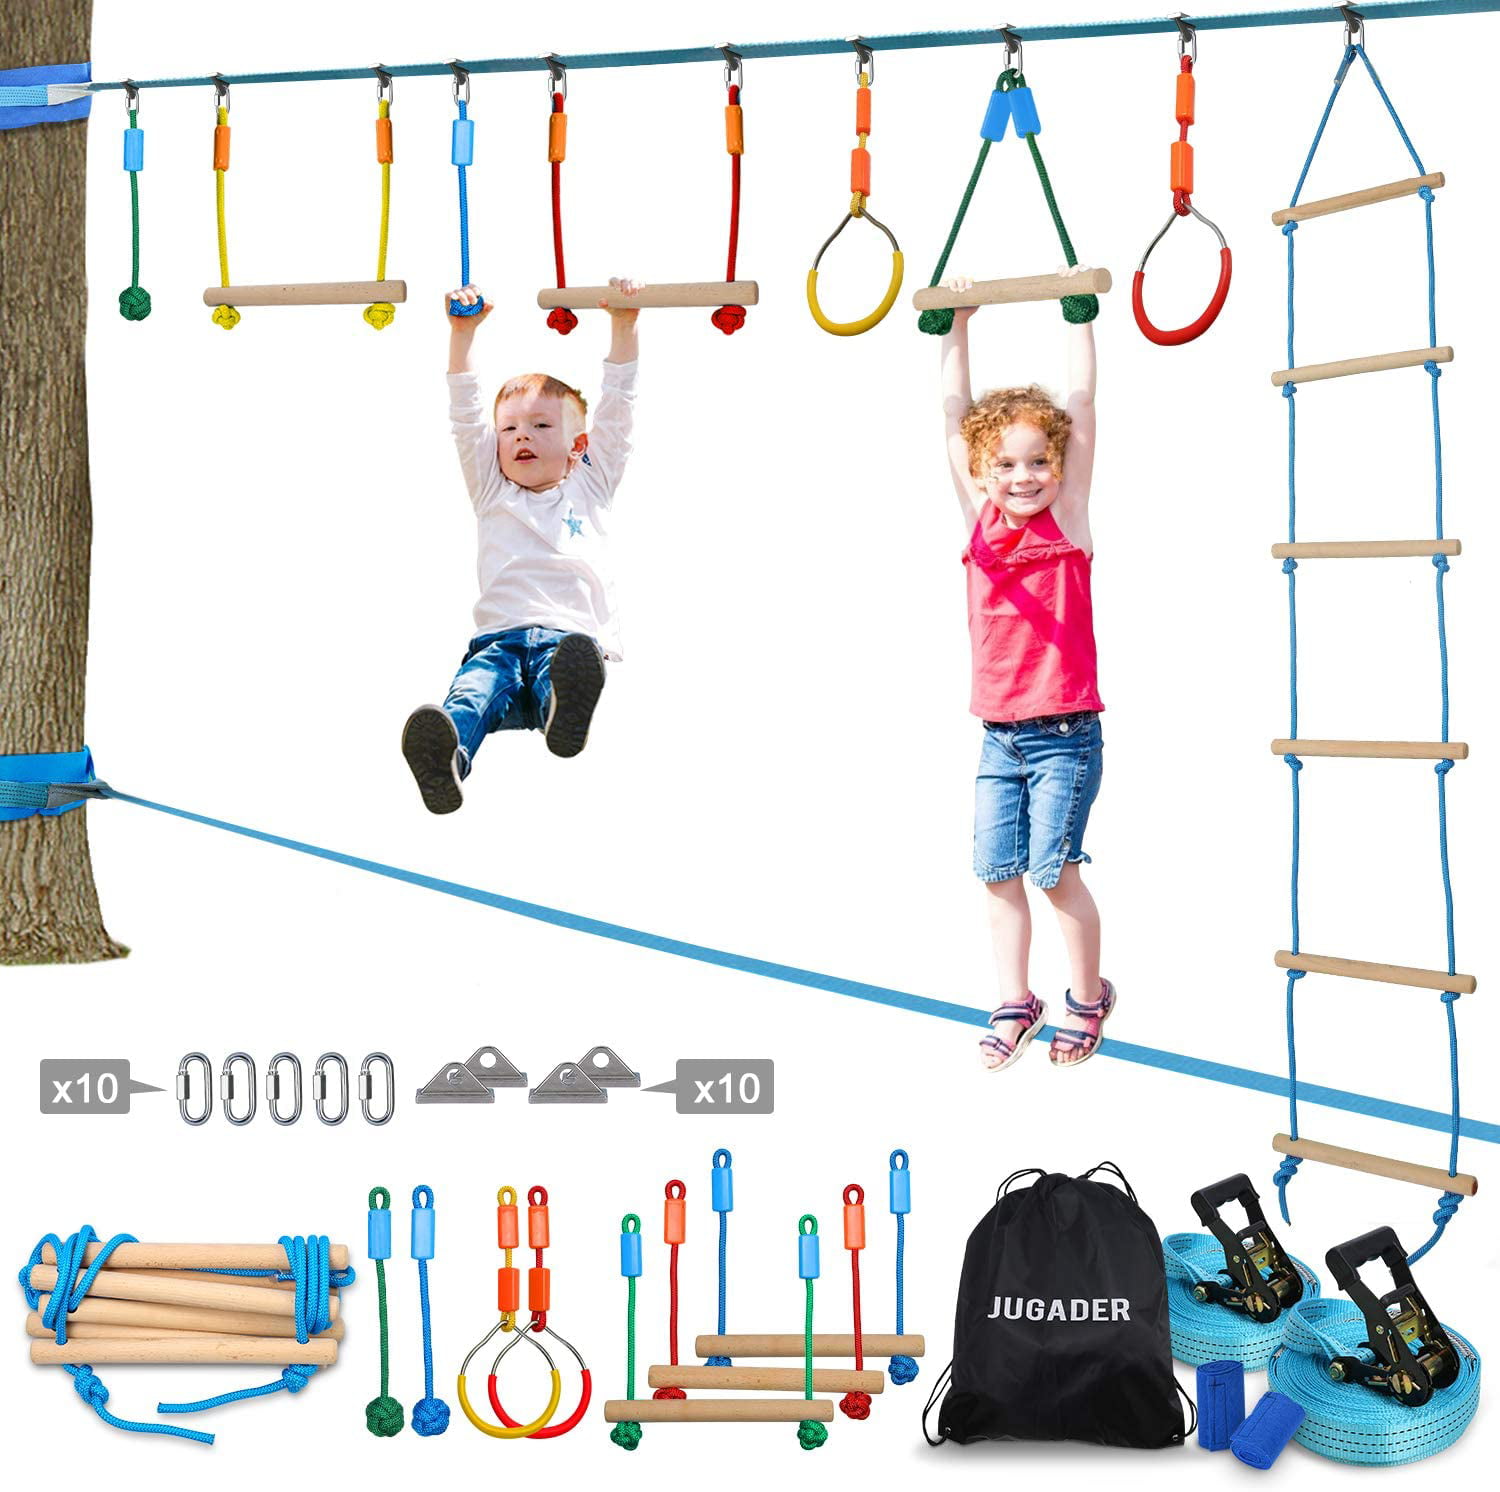 Jugader Ninja Warrior Obstacle Course for Kids Twister Wheel Monkey Bars Swing Rings Climbing Ladder 65ft Ninja Slackline with 41 Accessories Triangle Clips and Carabiners 